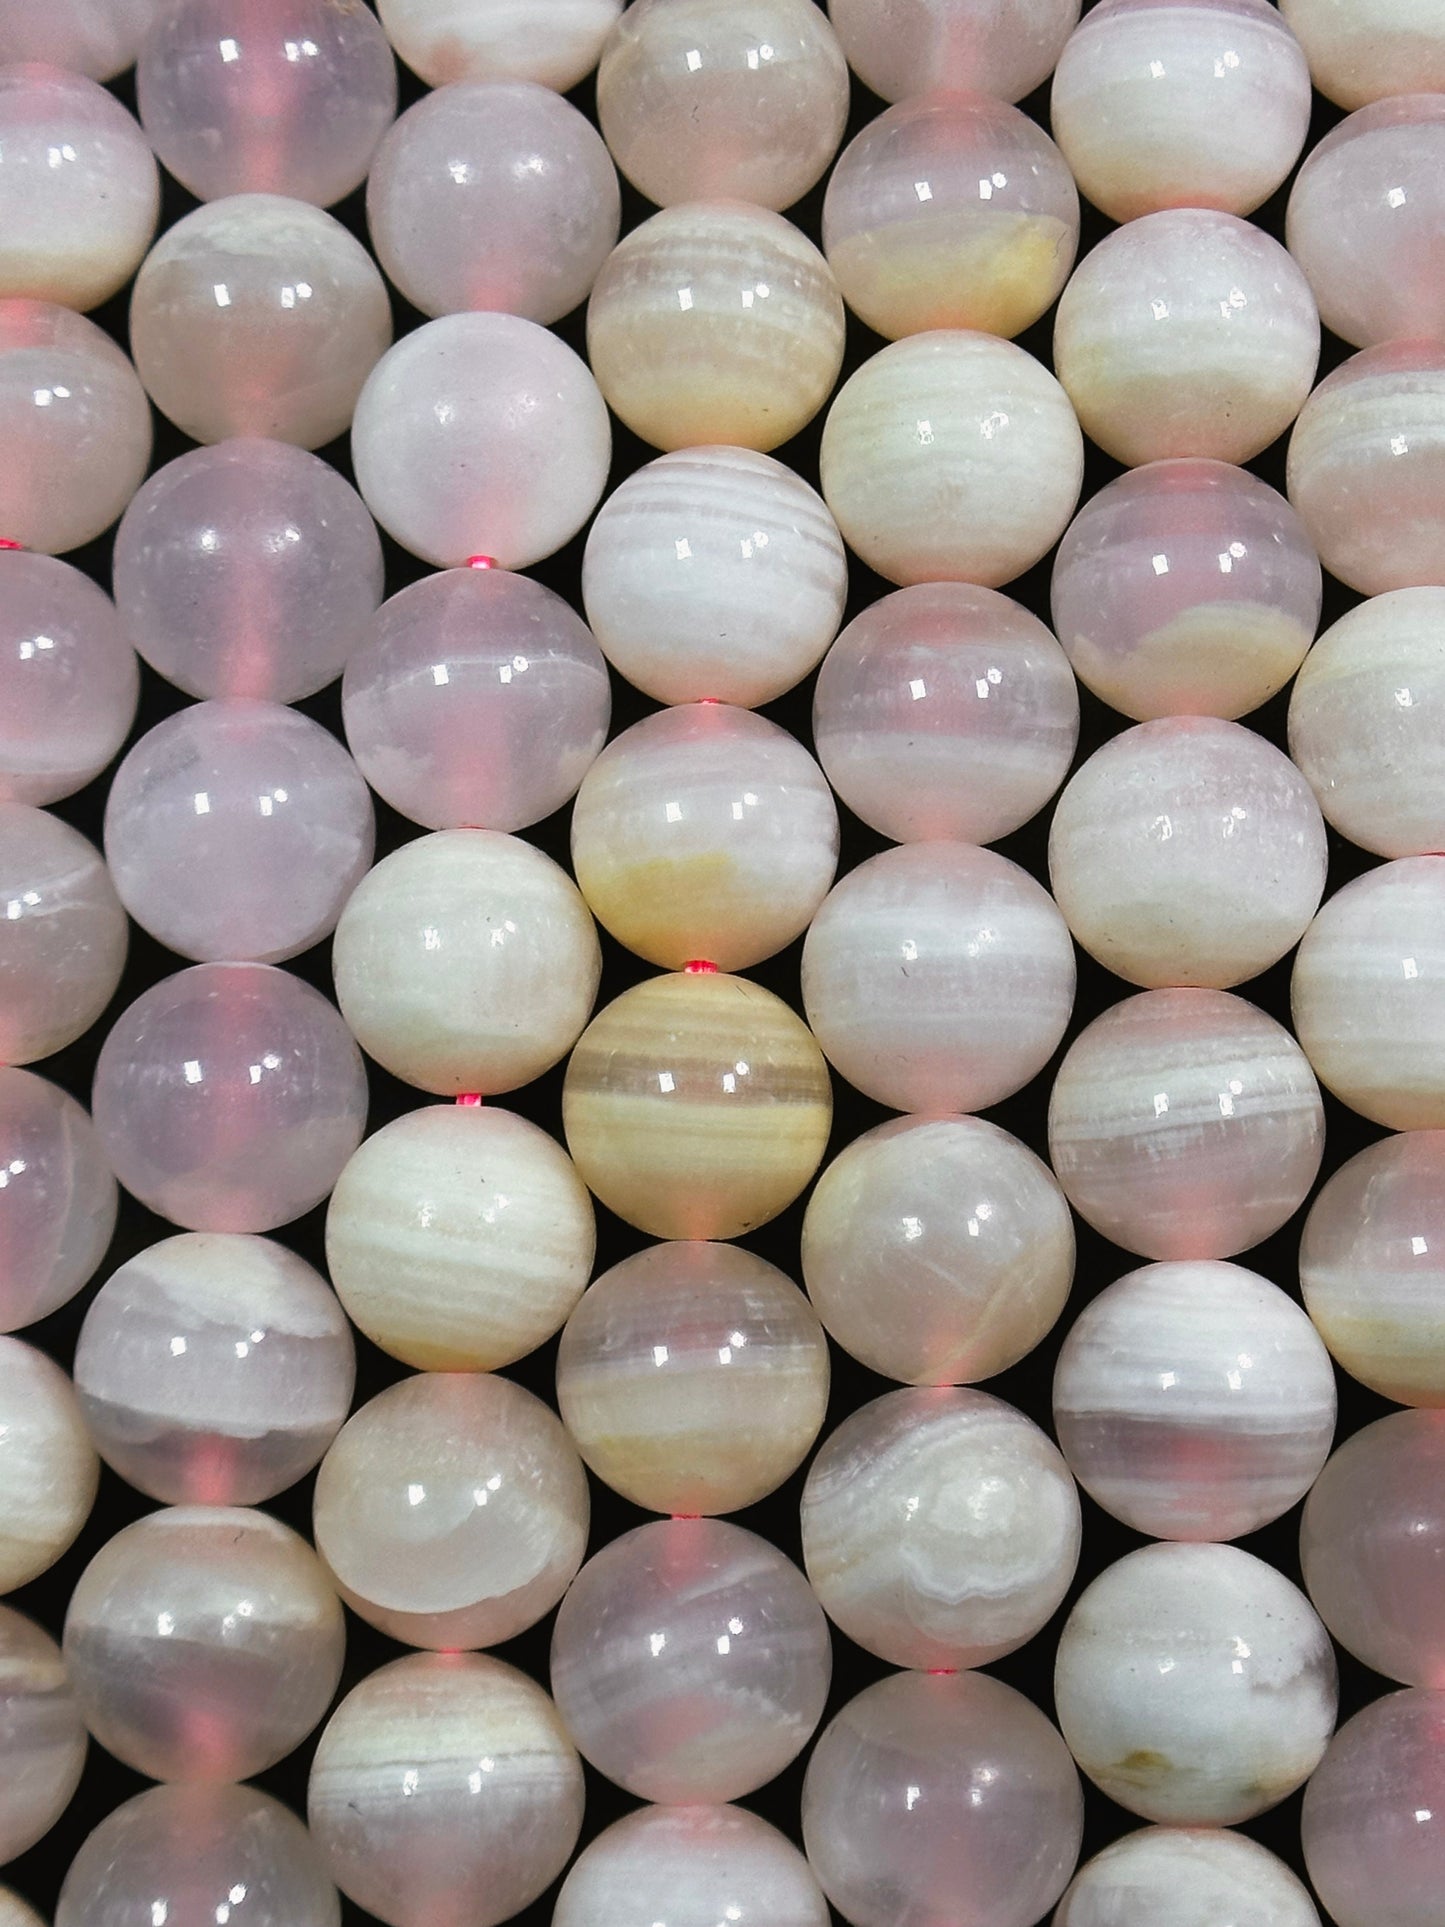 AAA Natural Pink Calcite Gemstone Bead 6mm 8mm 10mm Round Bead, Gorgeous Natural Pale Pink Color Calcite Gemstone Bead, High Quality 15.5"